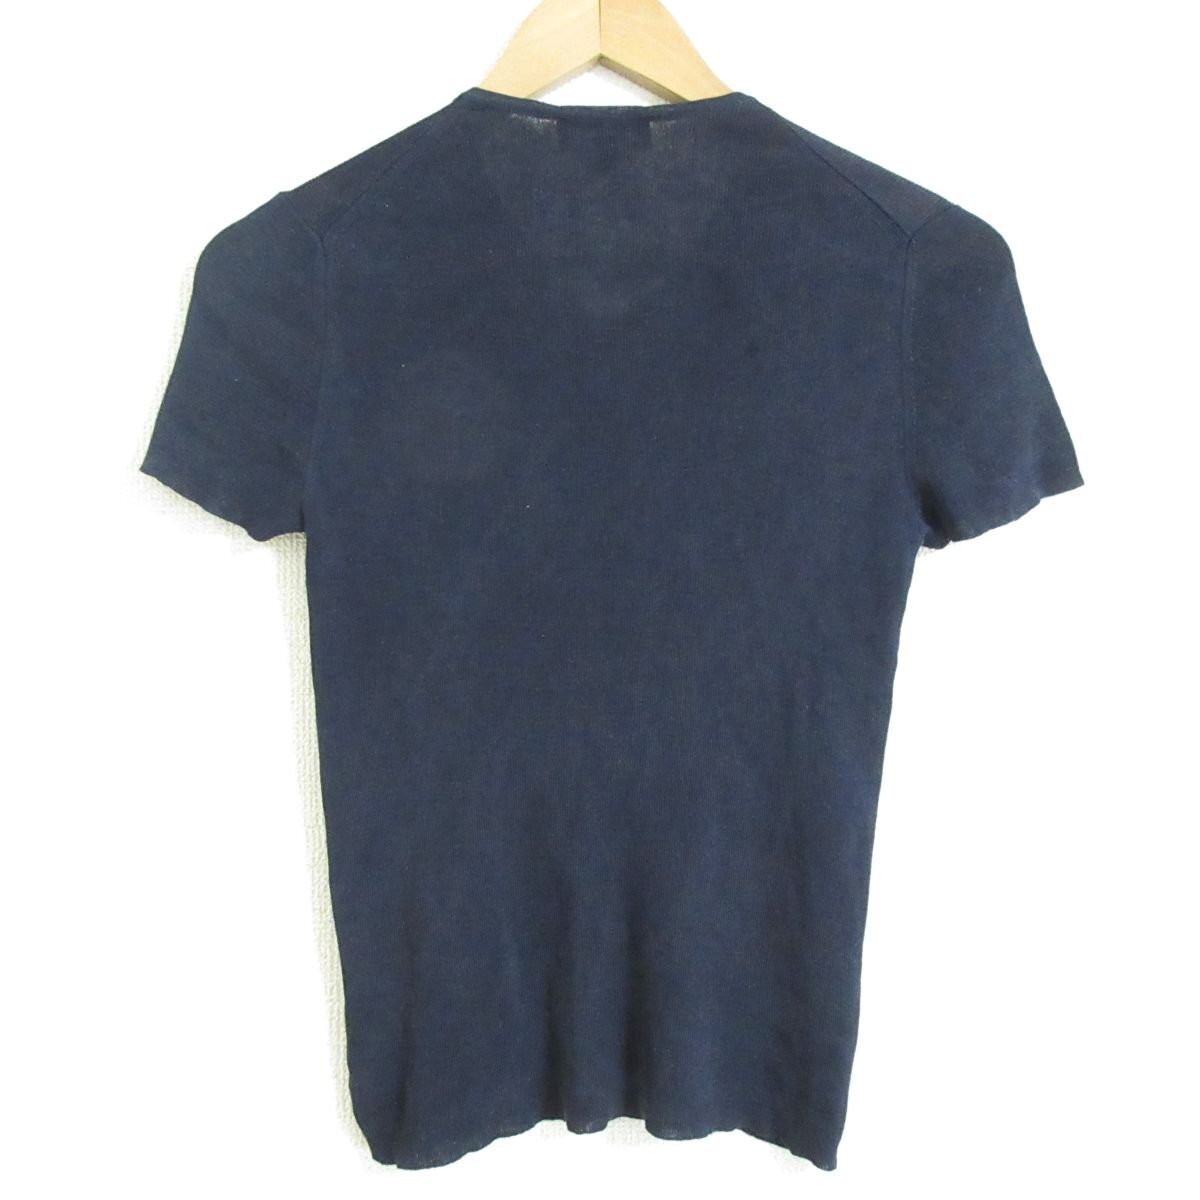  beautiful goods GUCCI Gucci 1998 year made Tom Ford period silk 100% V neck short sleeves T-shirt cut and sewn S navy 